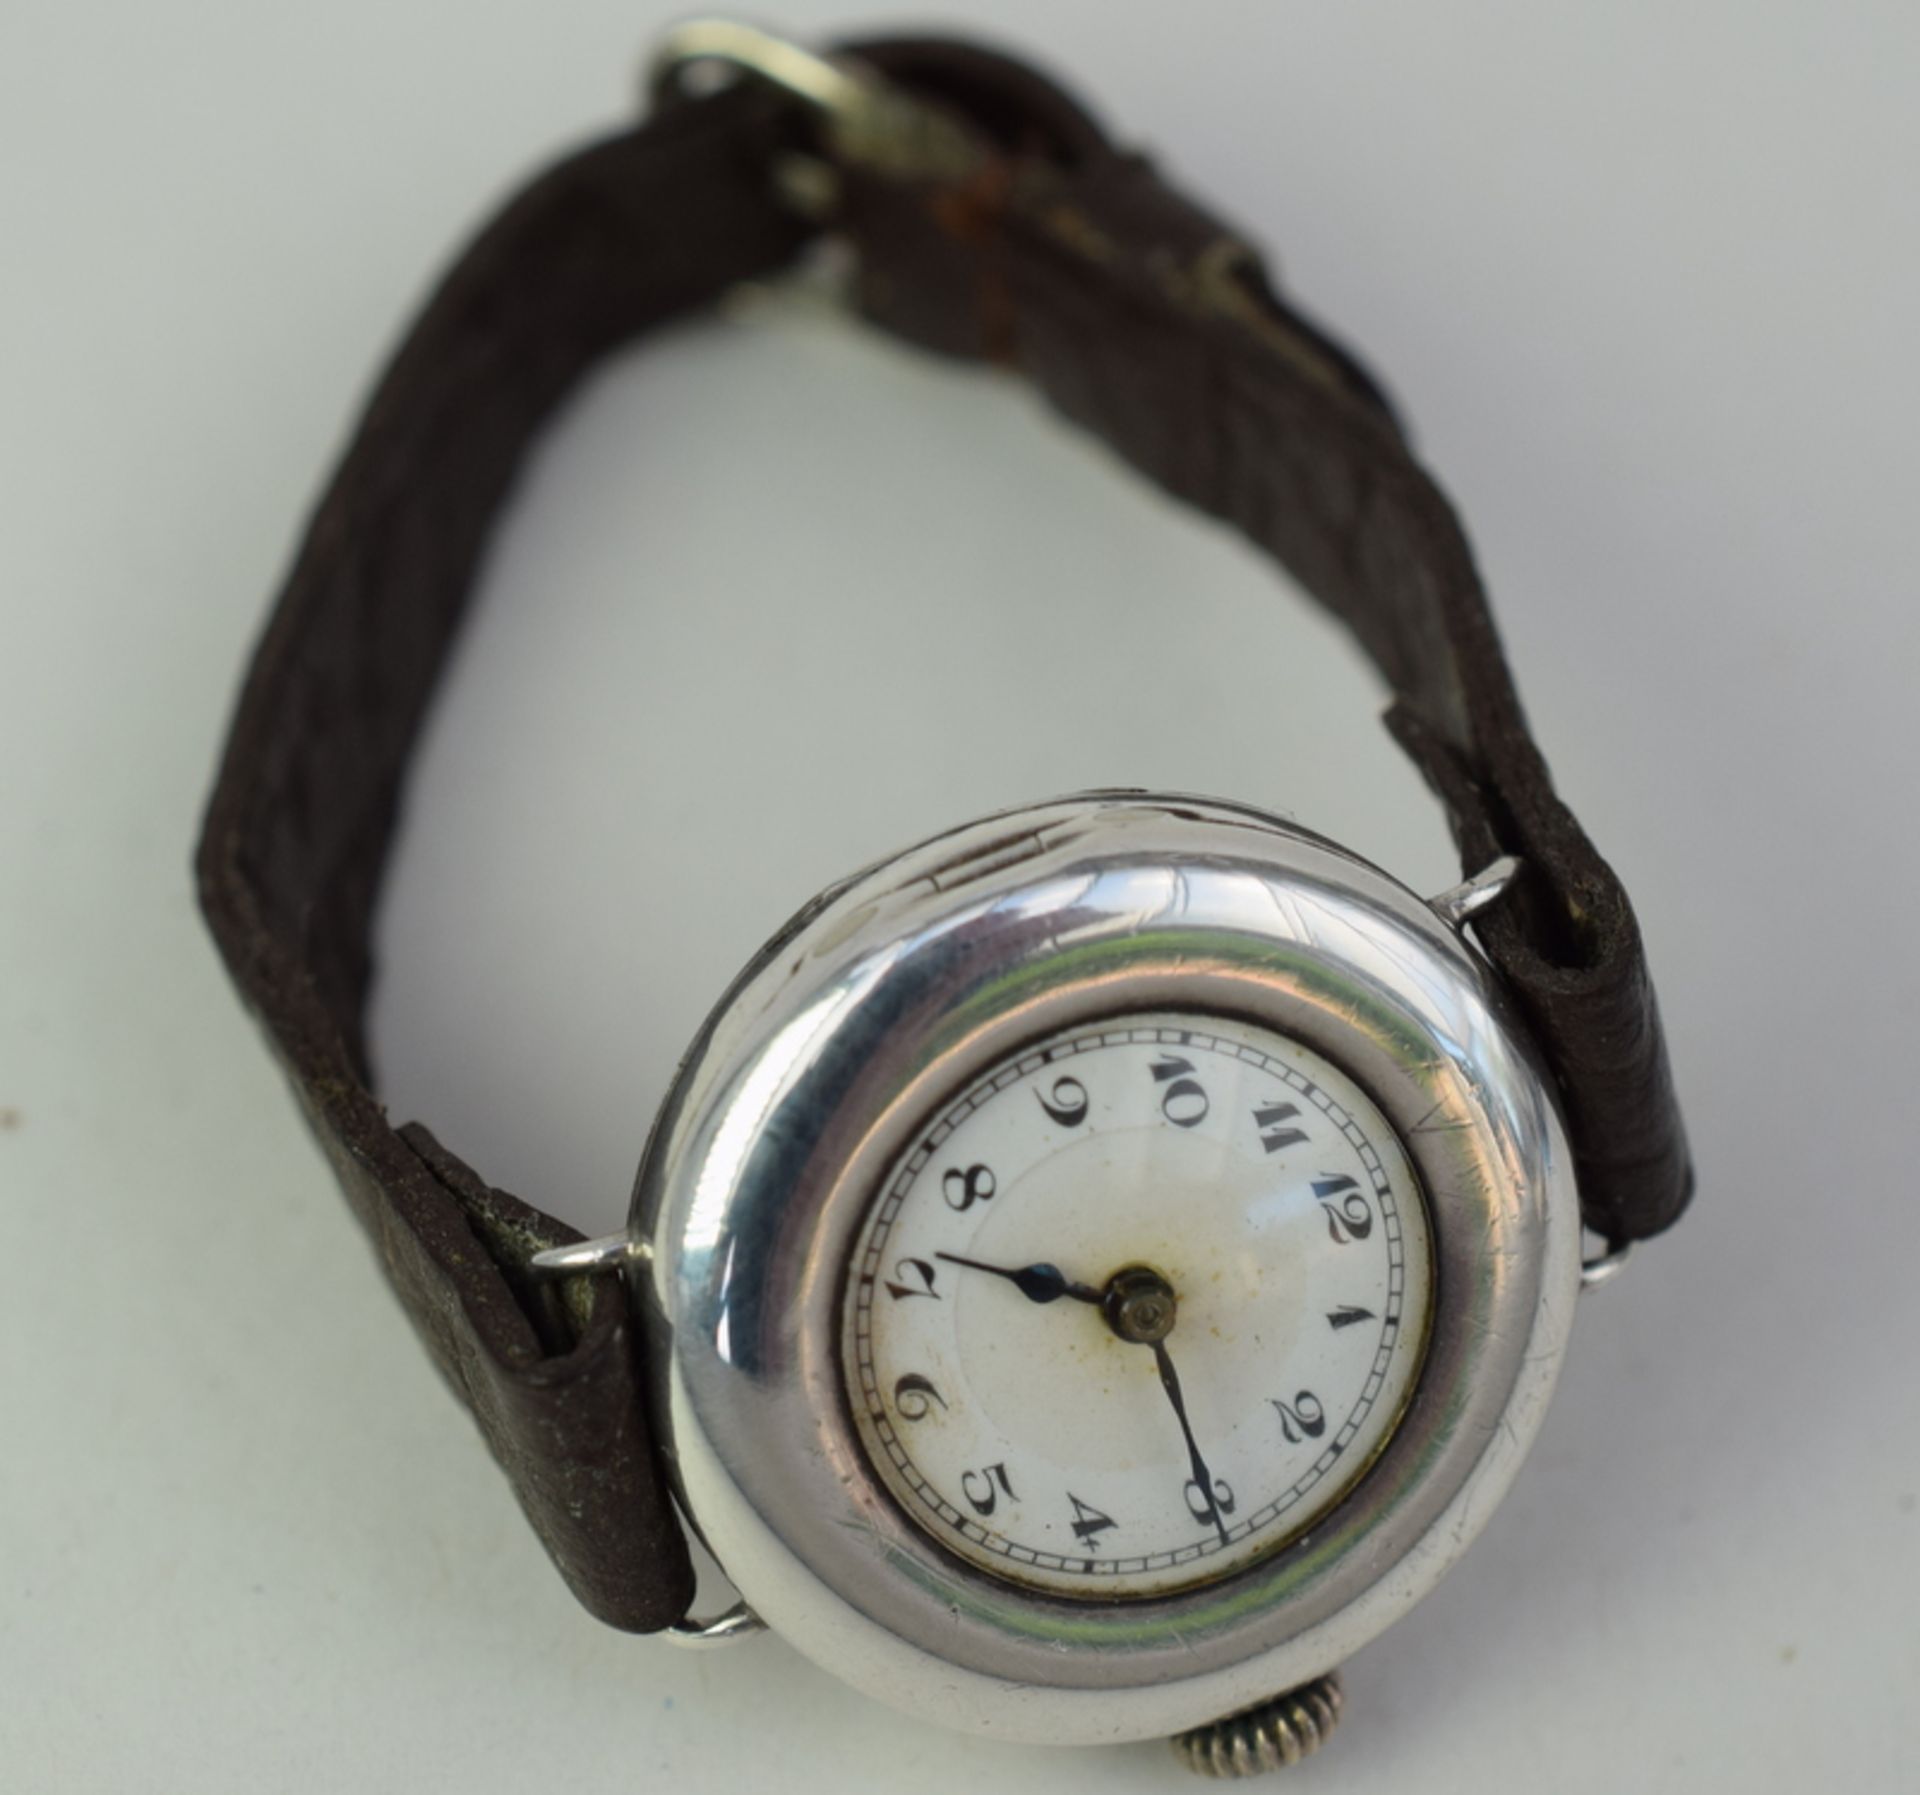 Lady's Silver Trench Watch c1920/30s - Image 2 of 7